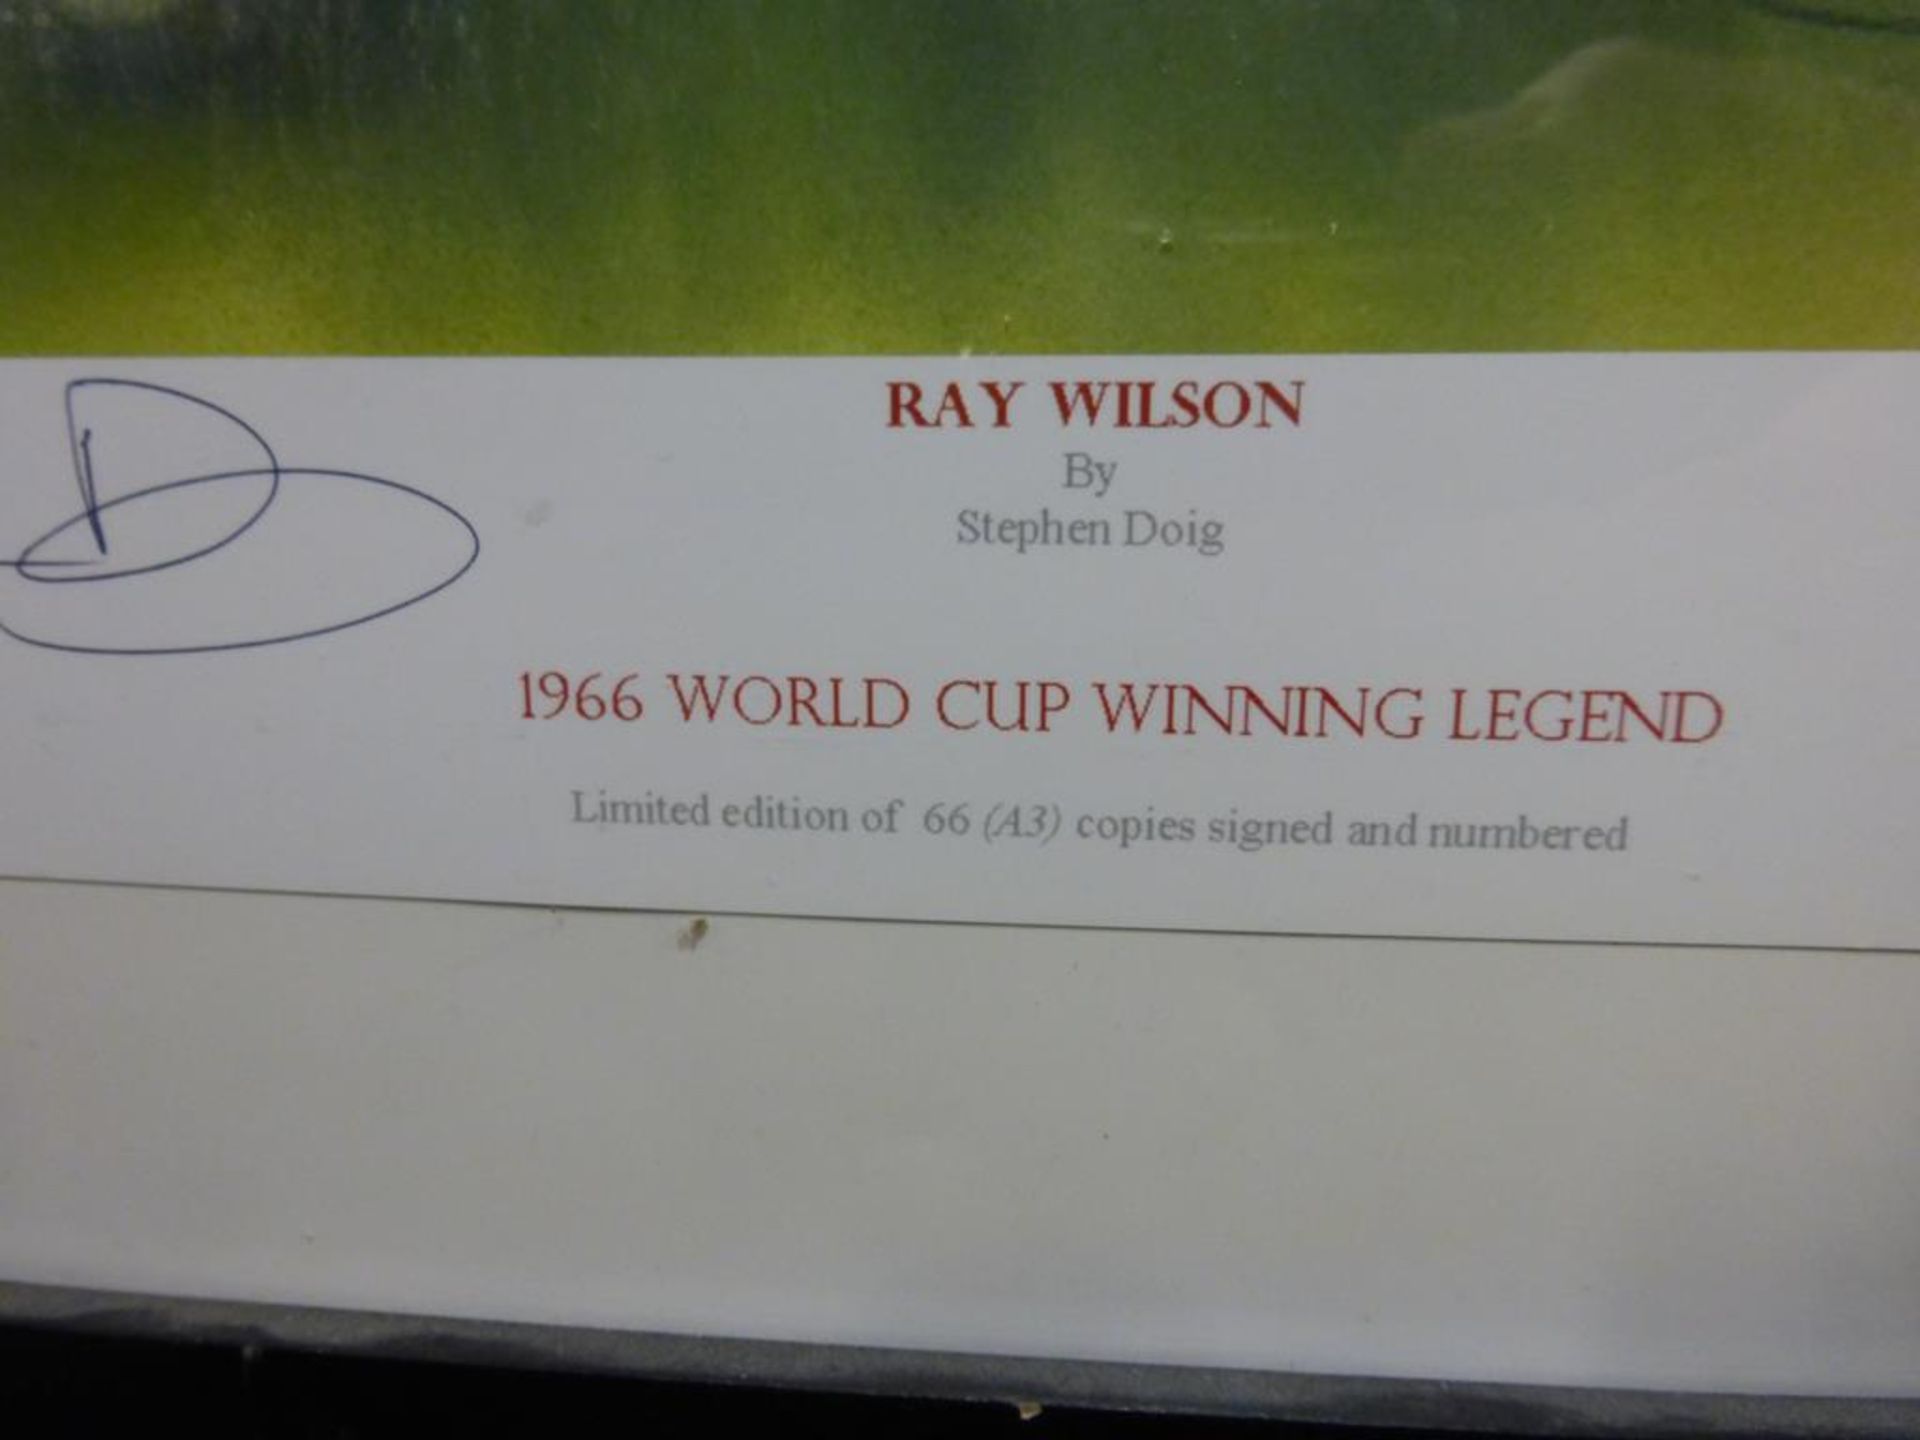 Sports Autographs: Ray Wilson "1966 World Cup Winning Legend" - Image 2 of 6